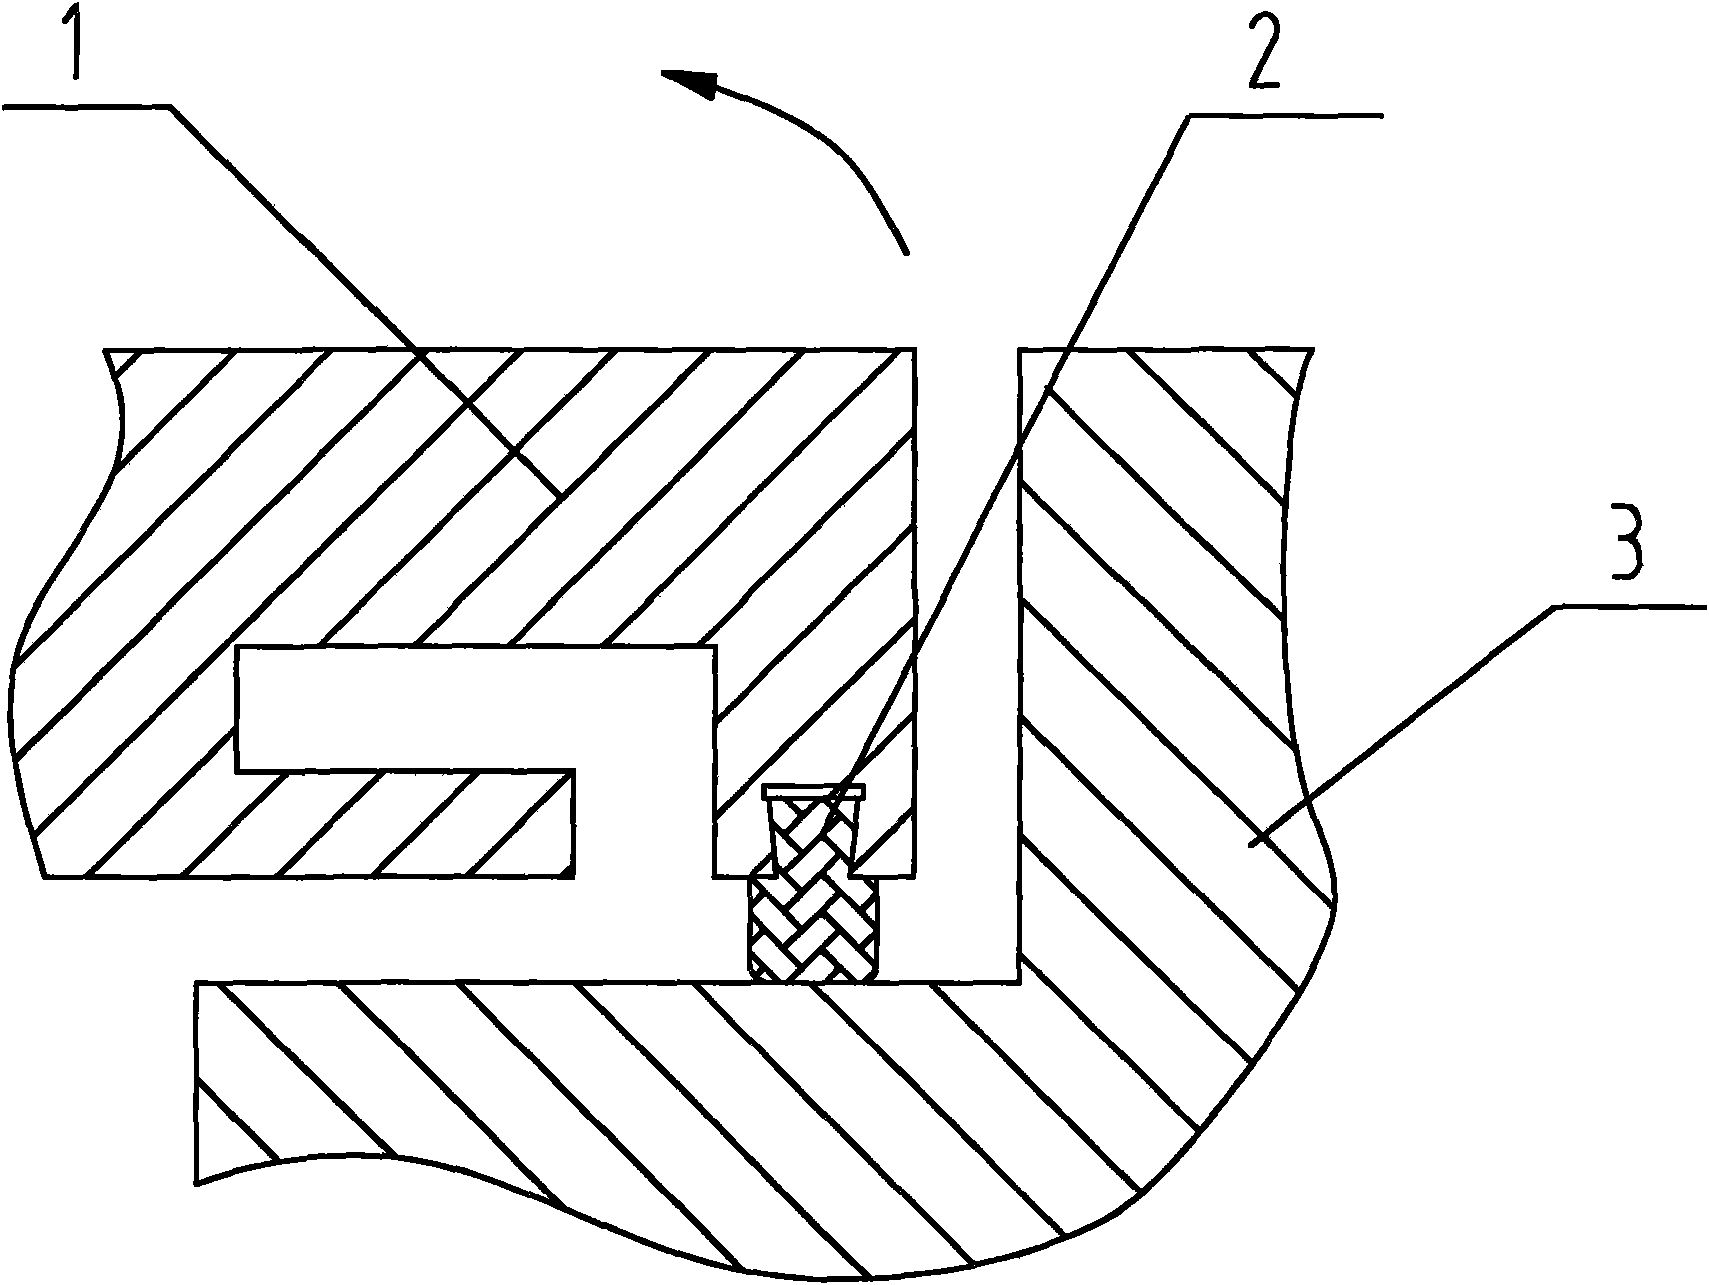 Microwave leakage preventing device